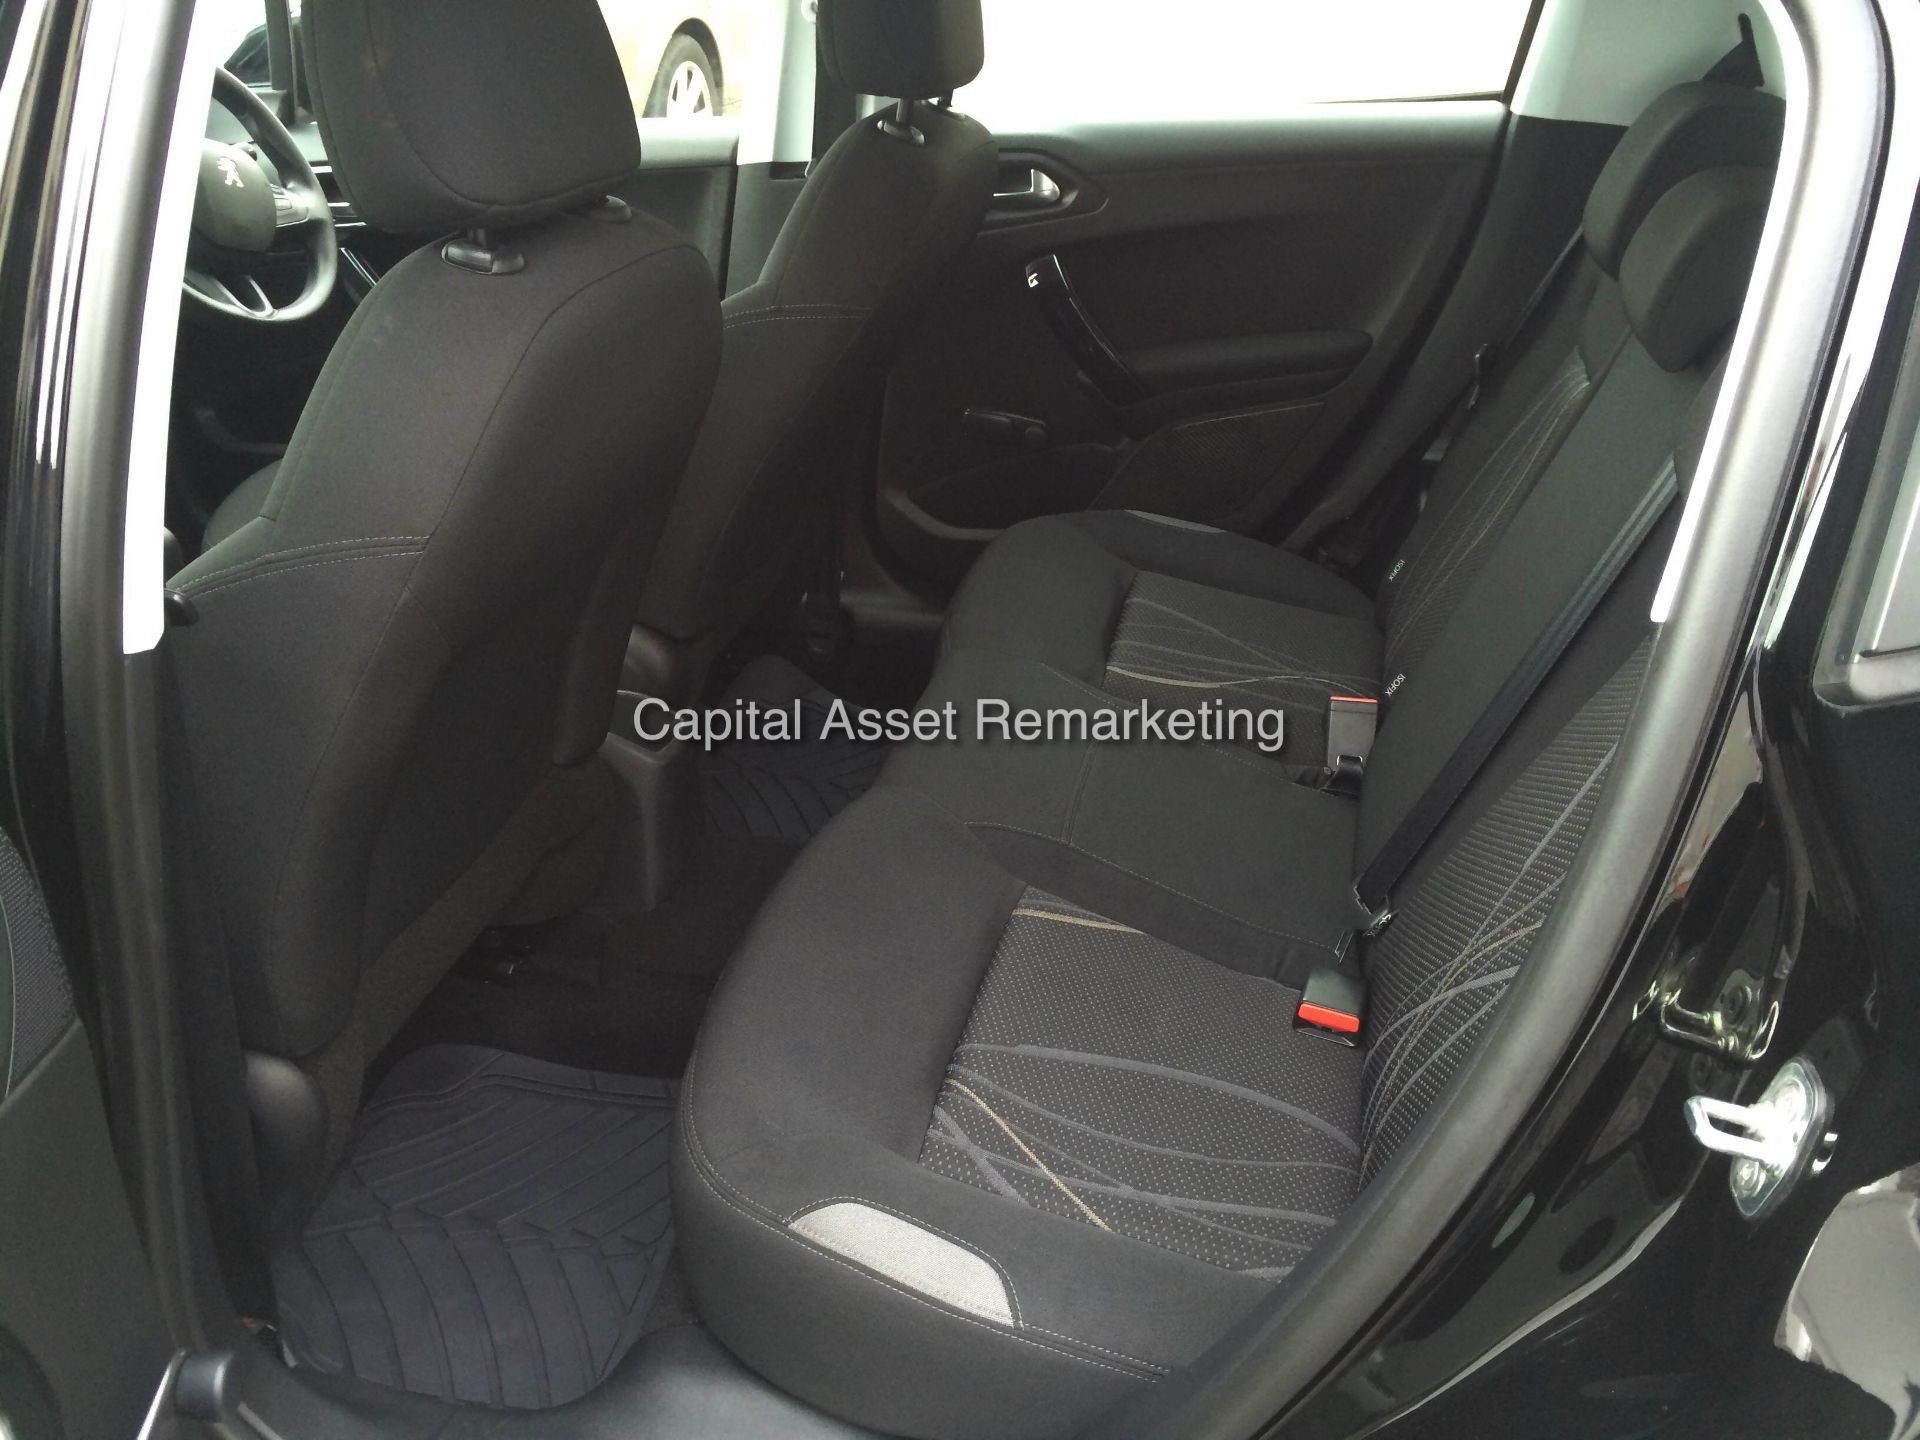 PEUGEOT 208 1.4 HDI 'ACTIVE' 5 DOOR (2014 - 14 REG)  **OWNED BY PEUGEOT FROM NEW** - Image 10 of 15